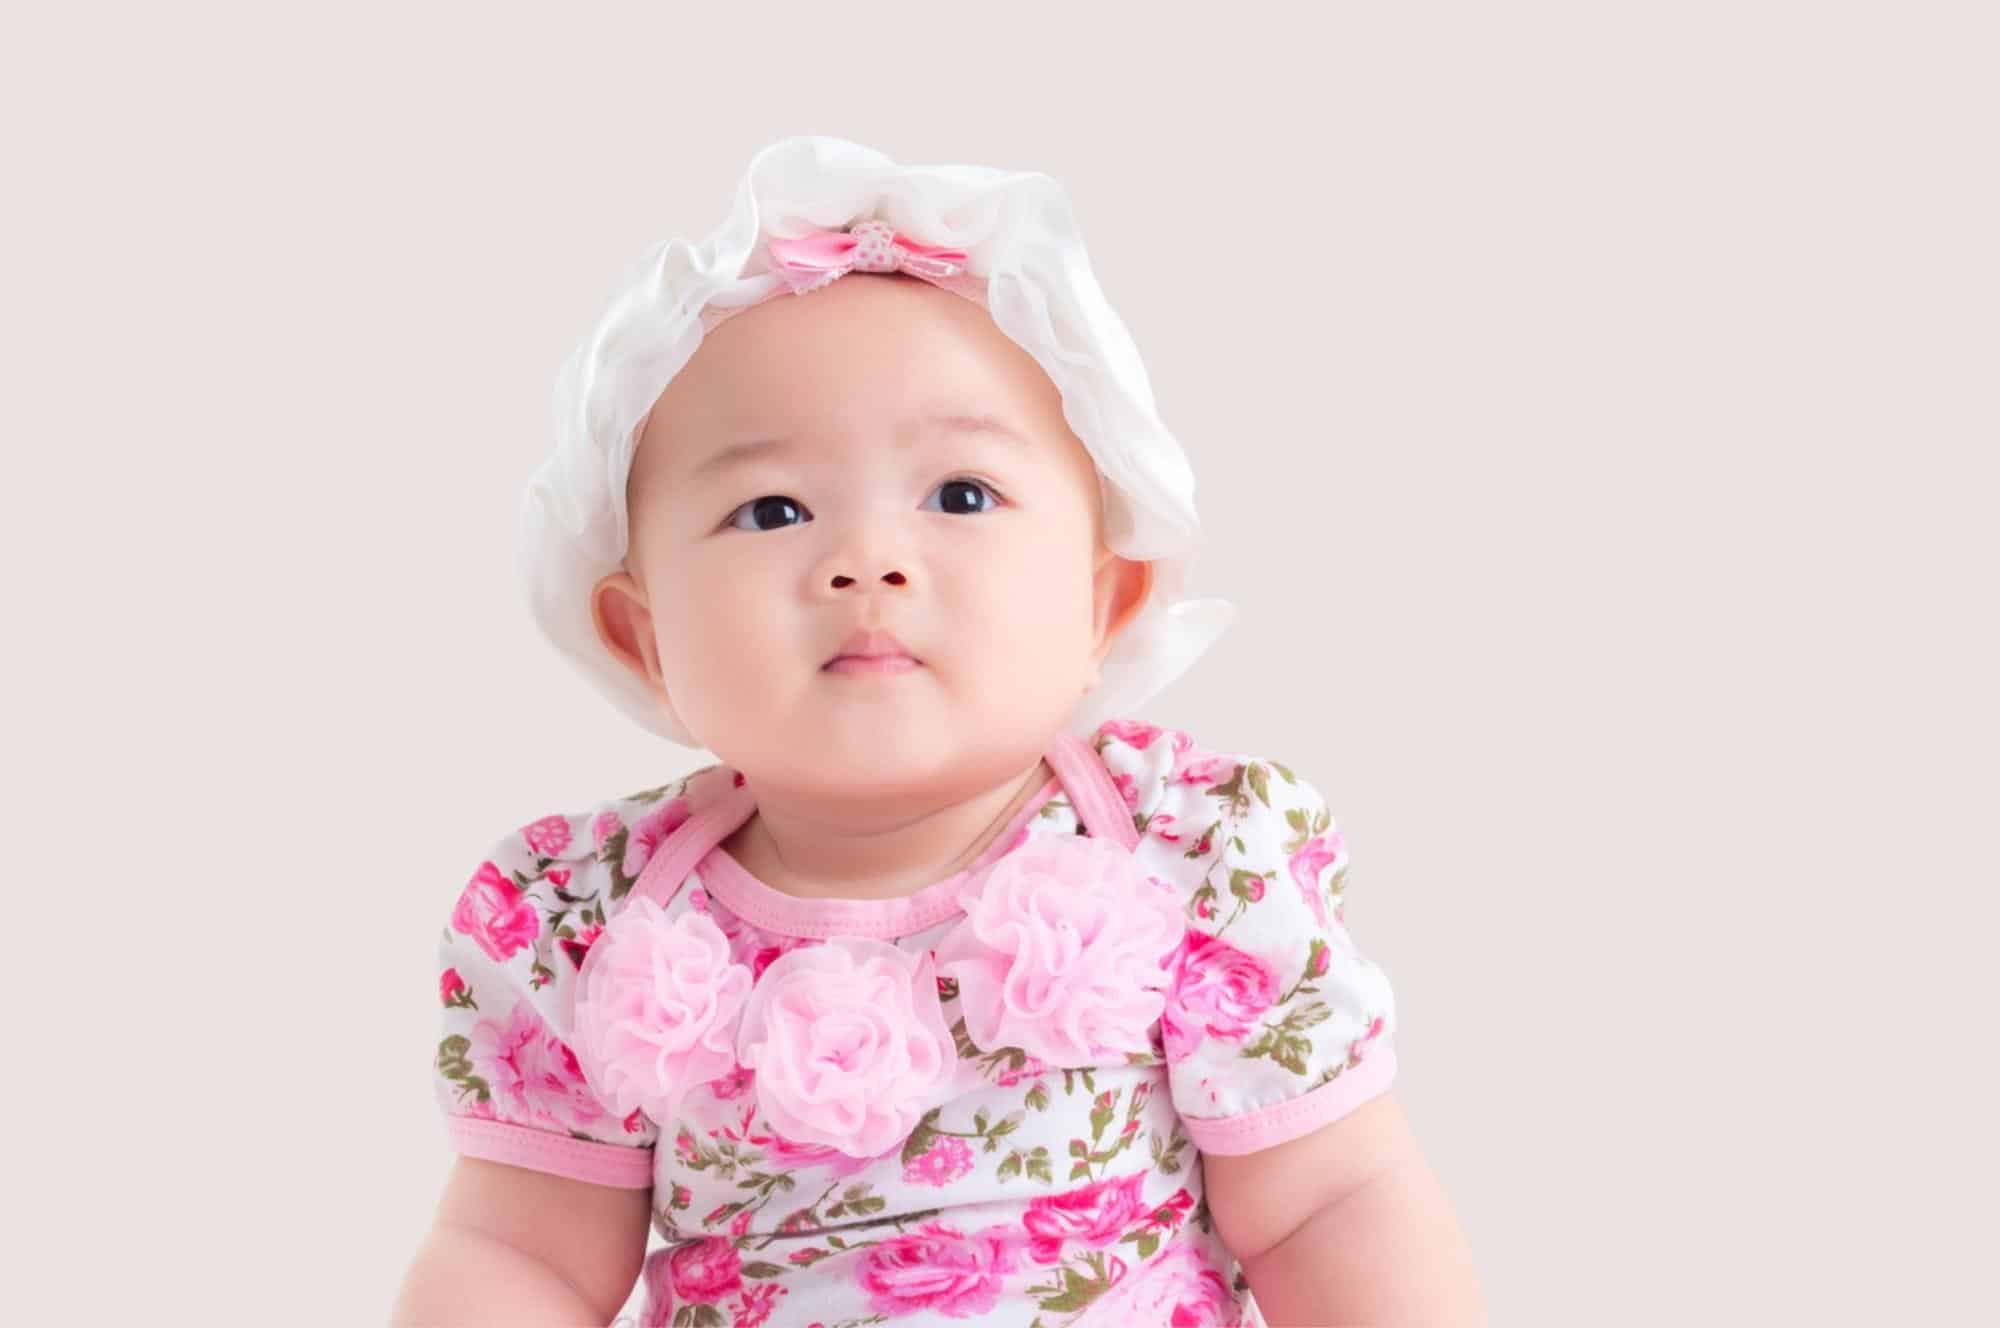 baby girl dressed in classic outfit